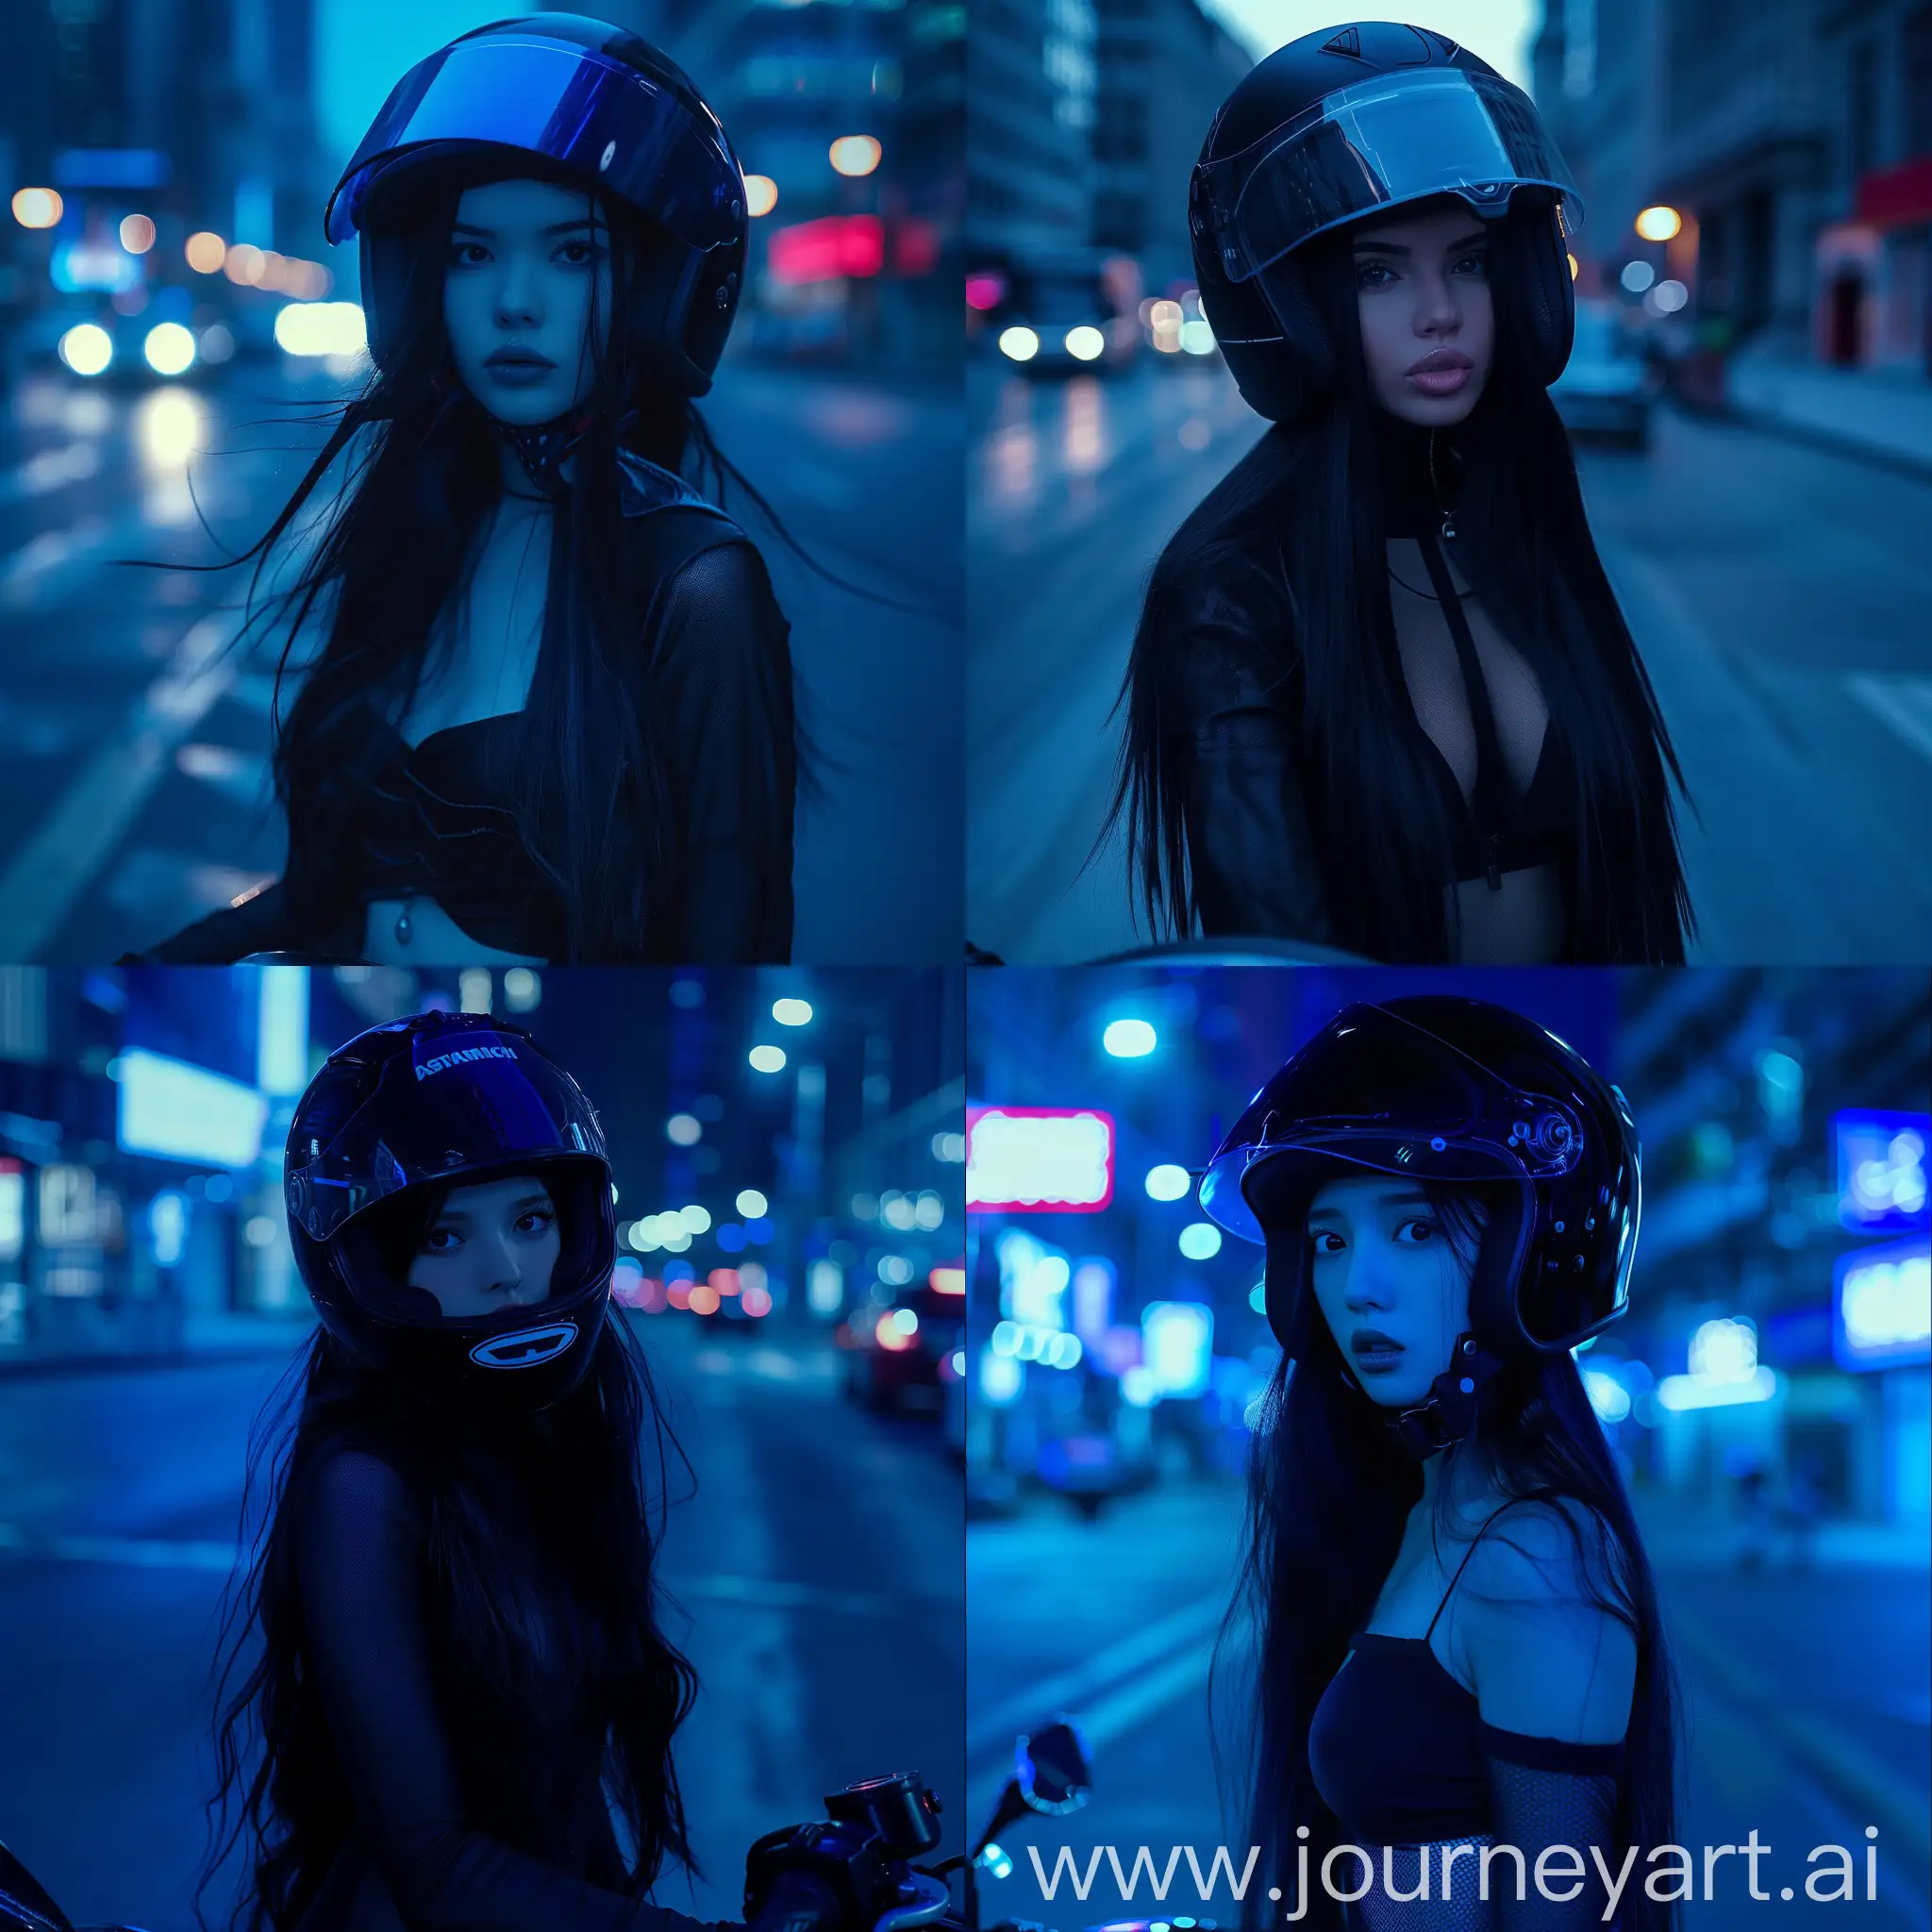 Urban-Chic-Stylish-Girl-with-Long-Black-Hair-and-Motorcycle-Helmet-in-City-Lights